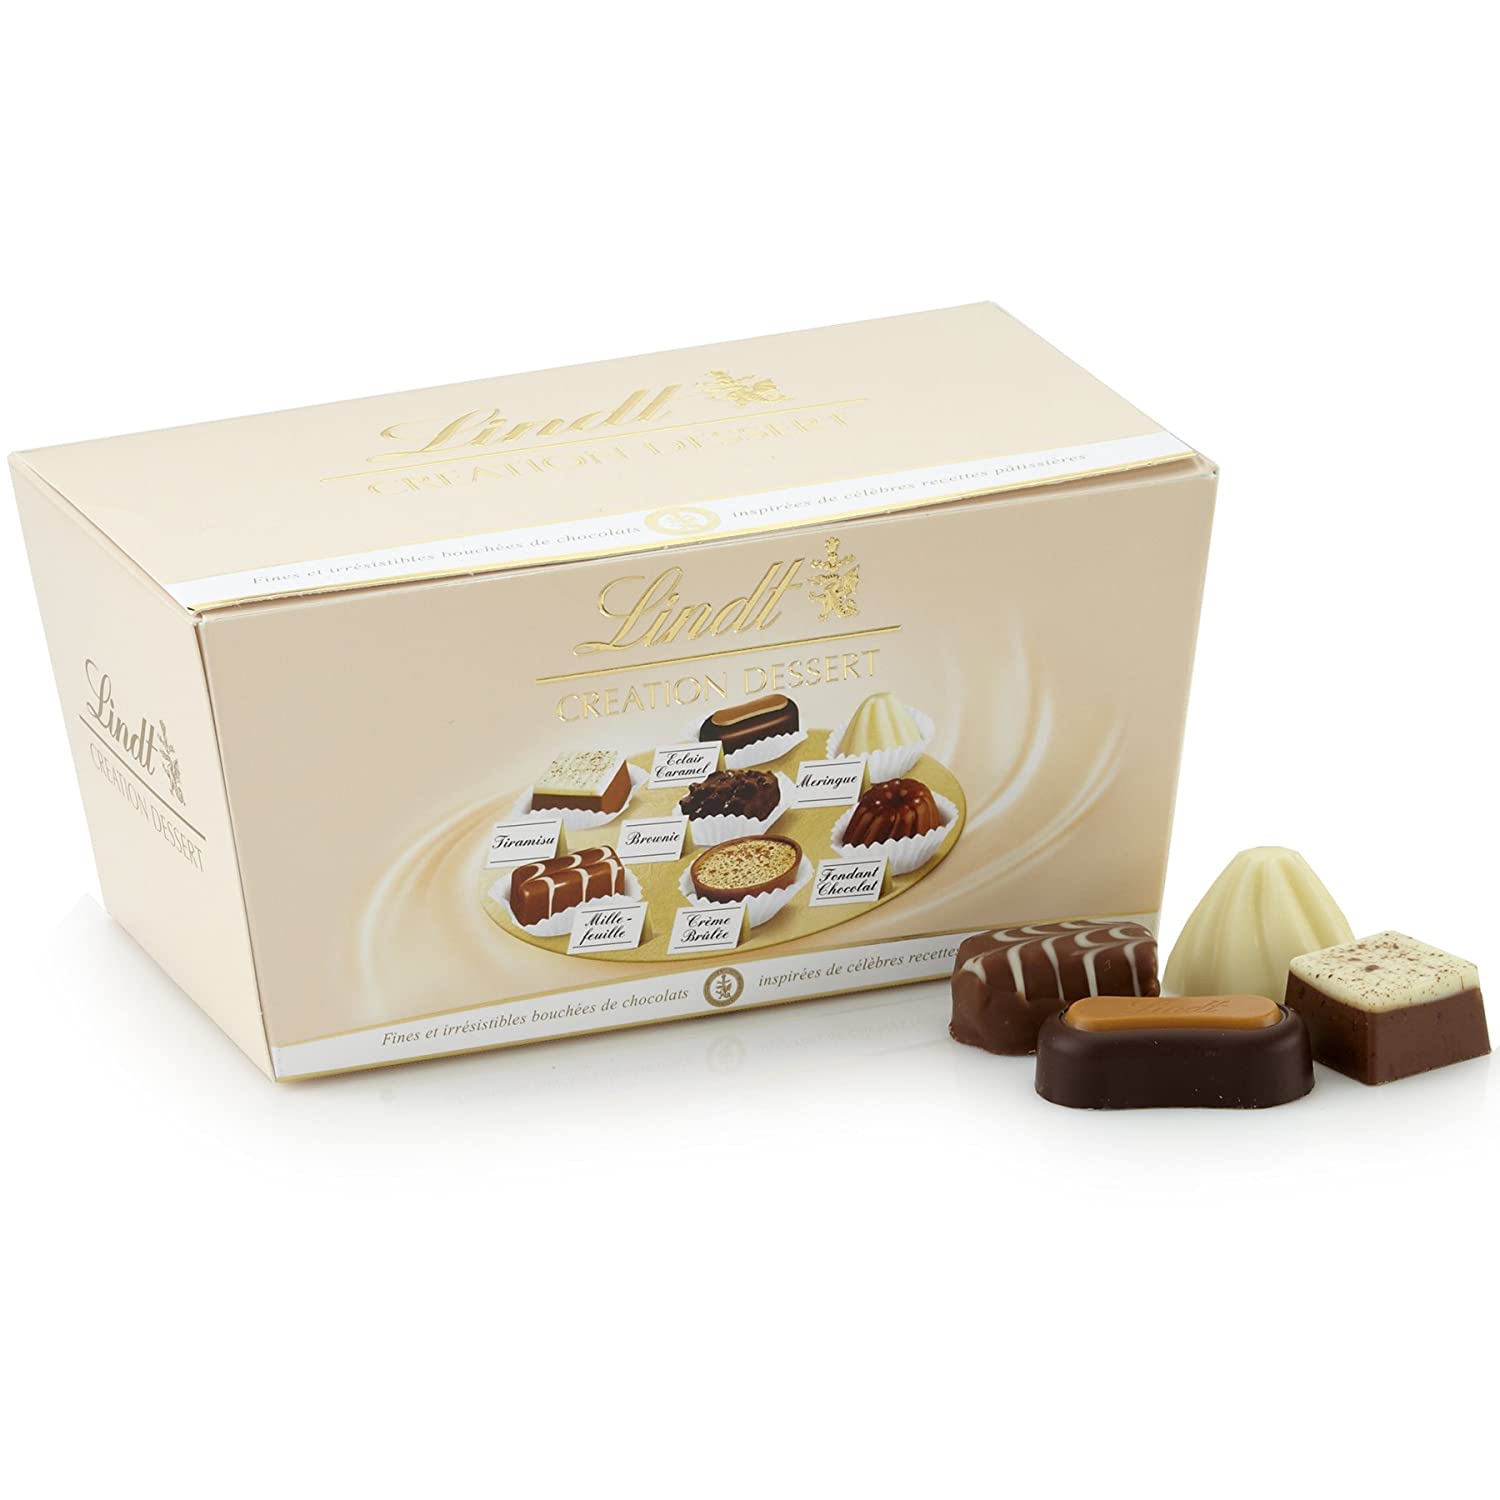 Lindt Creation Dessert, Assorted Chocolate Gift Box, 21 Pieces